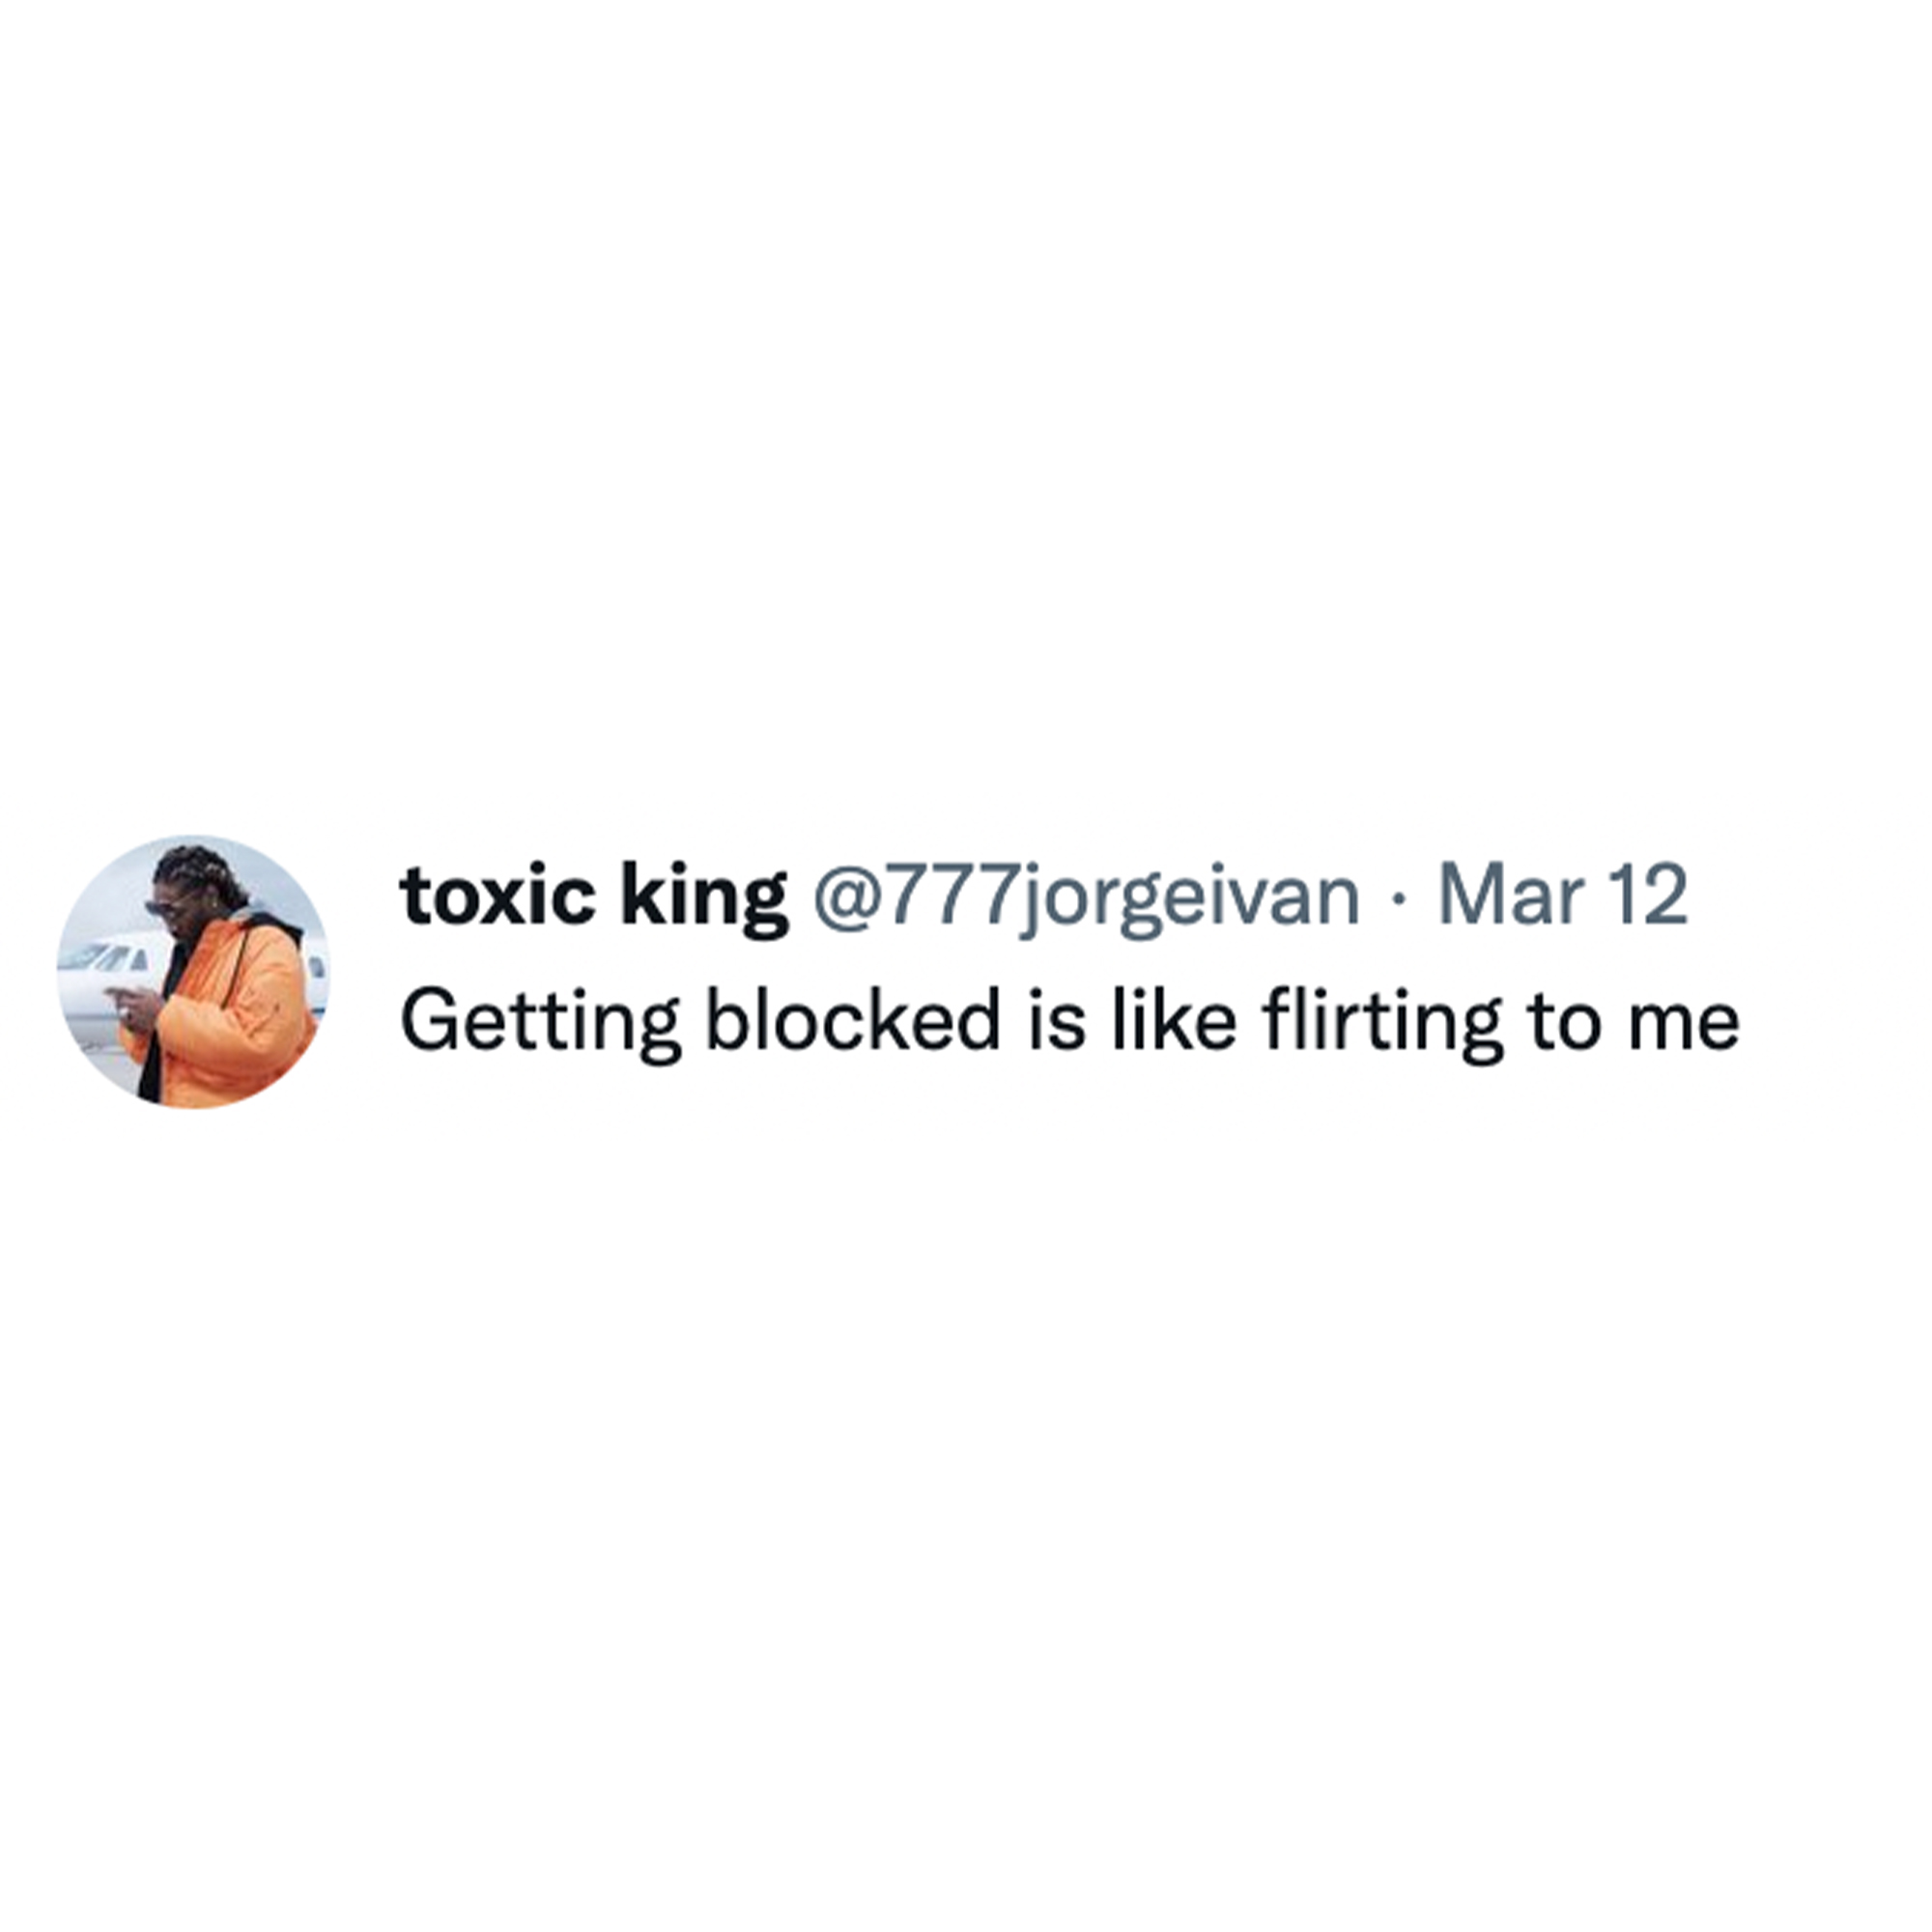 Toxic Memes and Tweets - graphics - . toxic king . Mar 12 Getting blocked is flirting to me